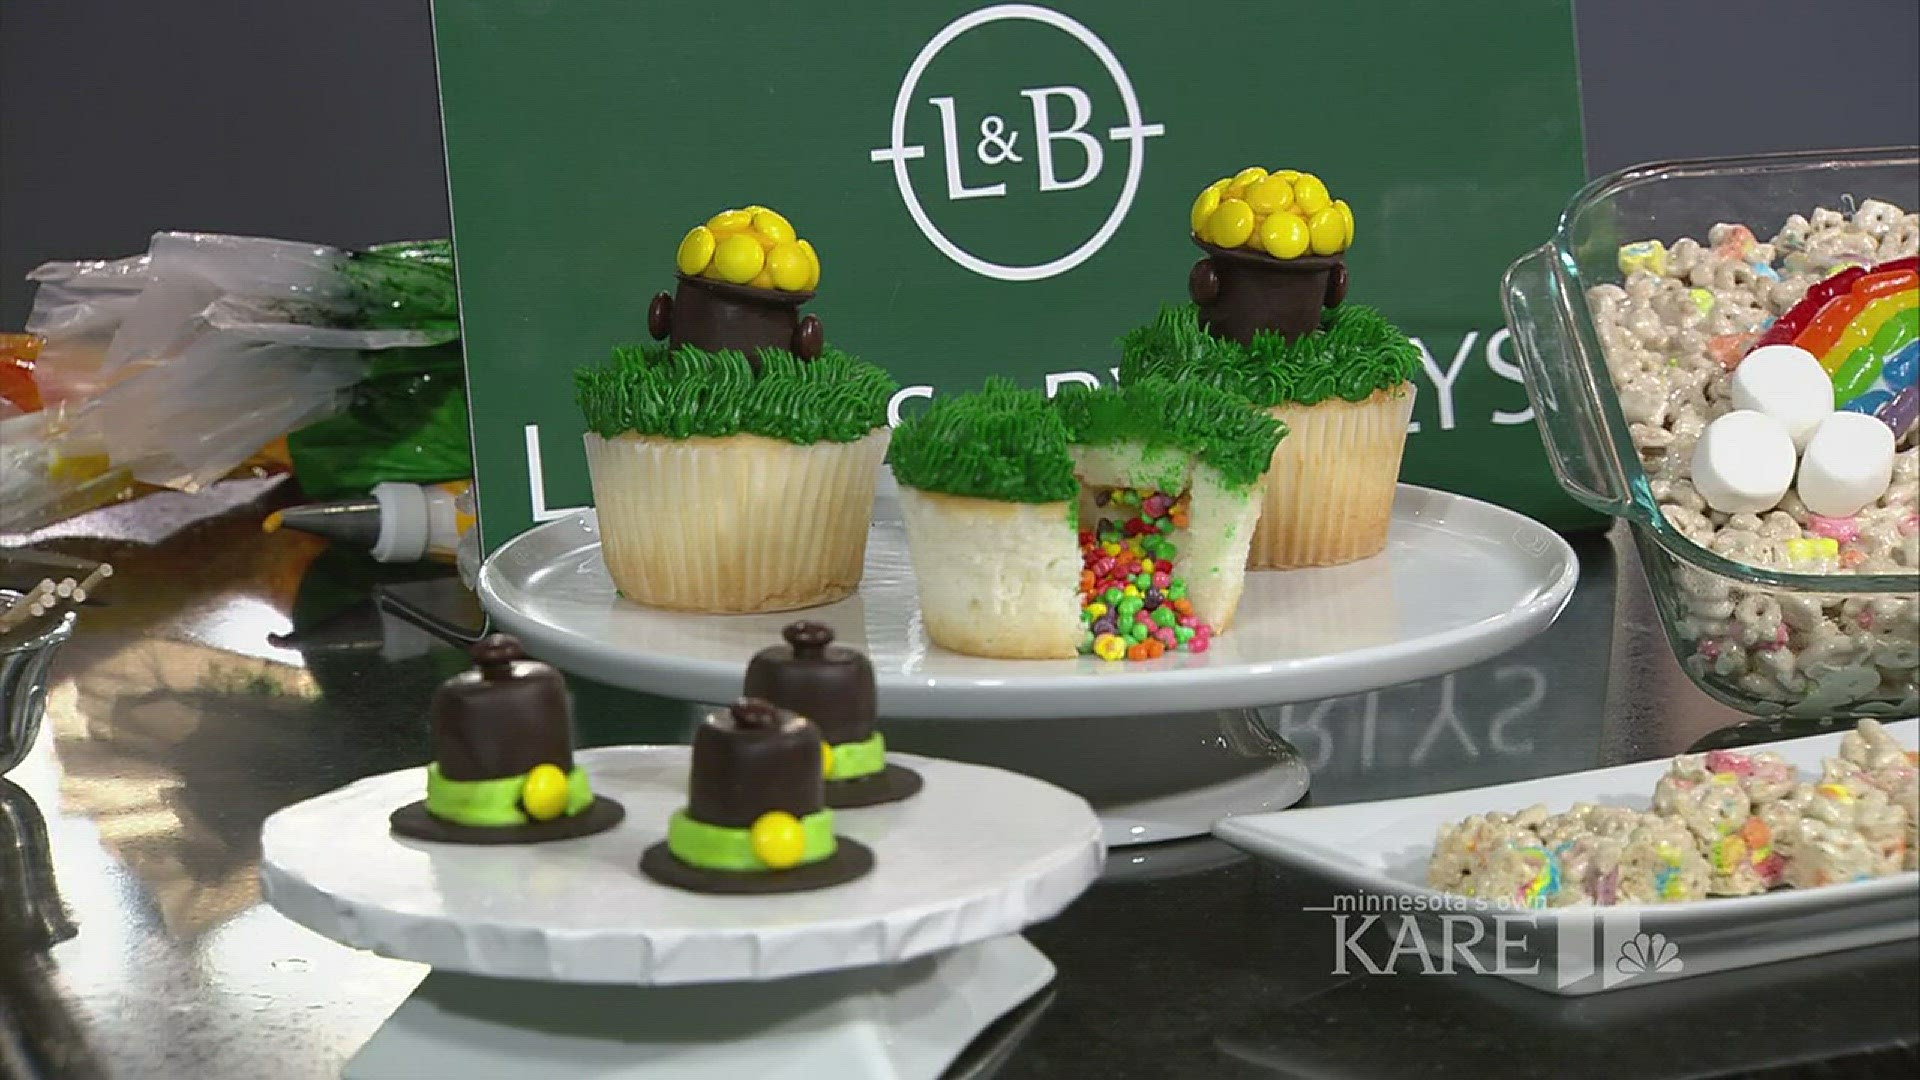 St. Patrick's Day treats for kids